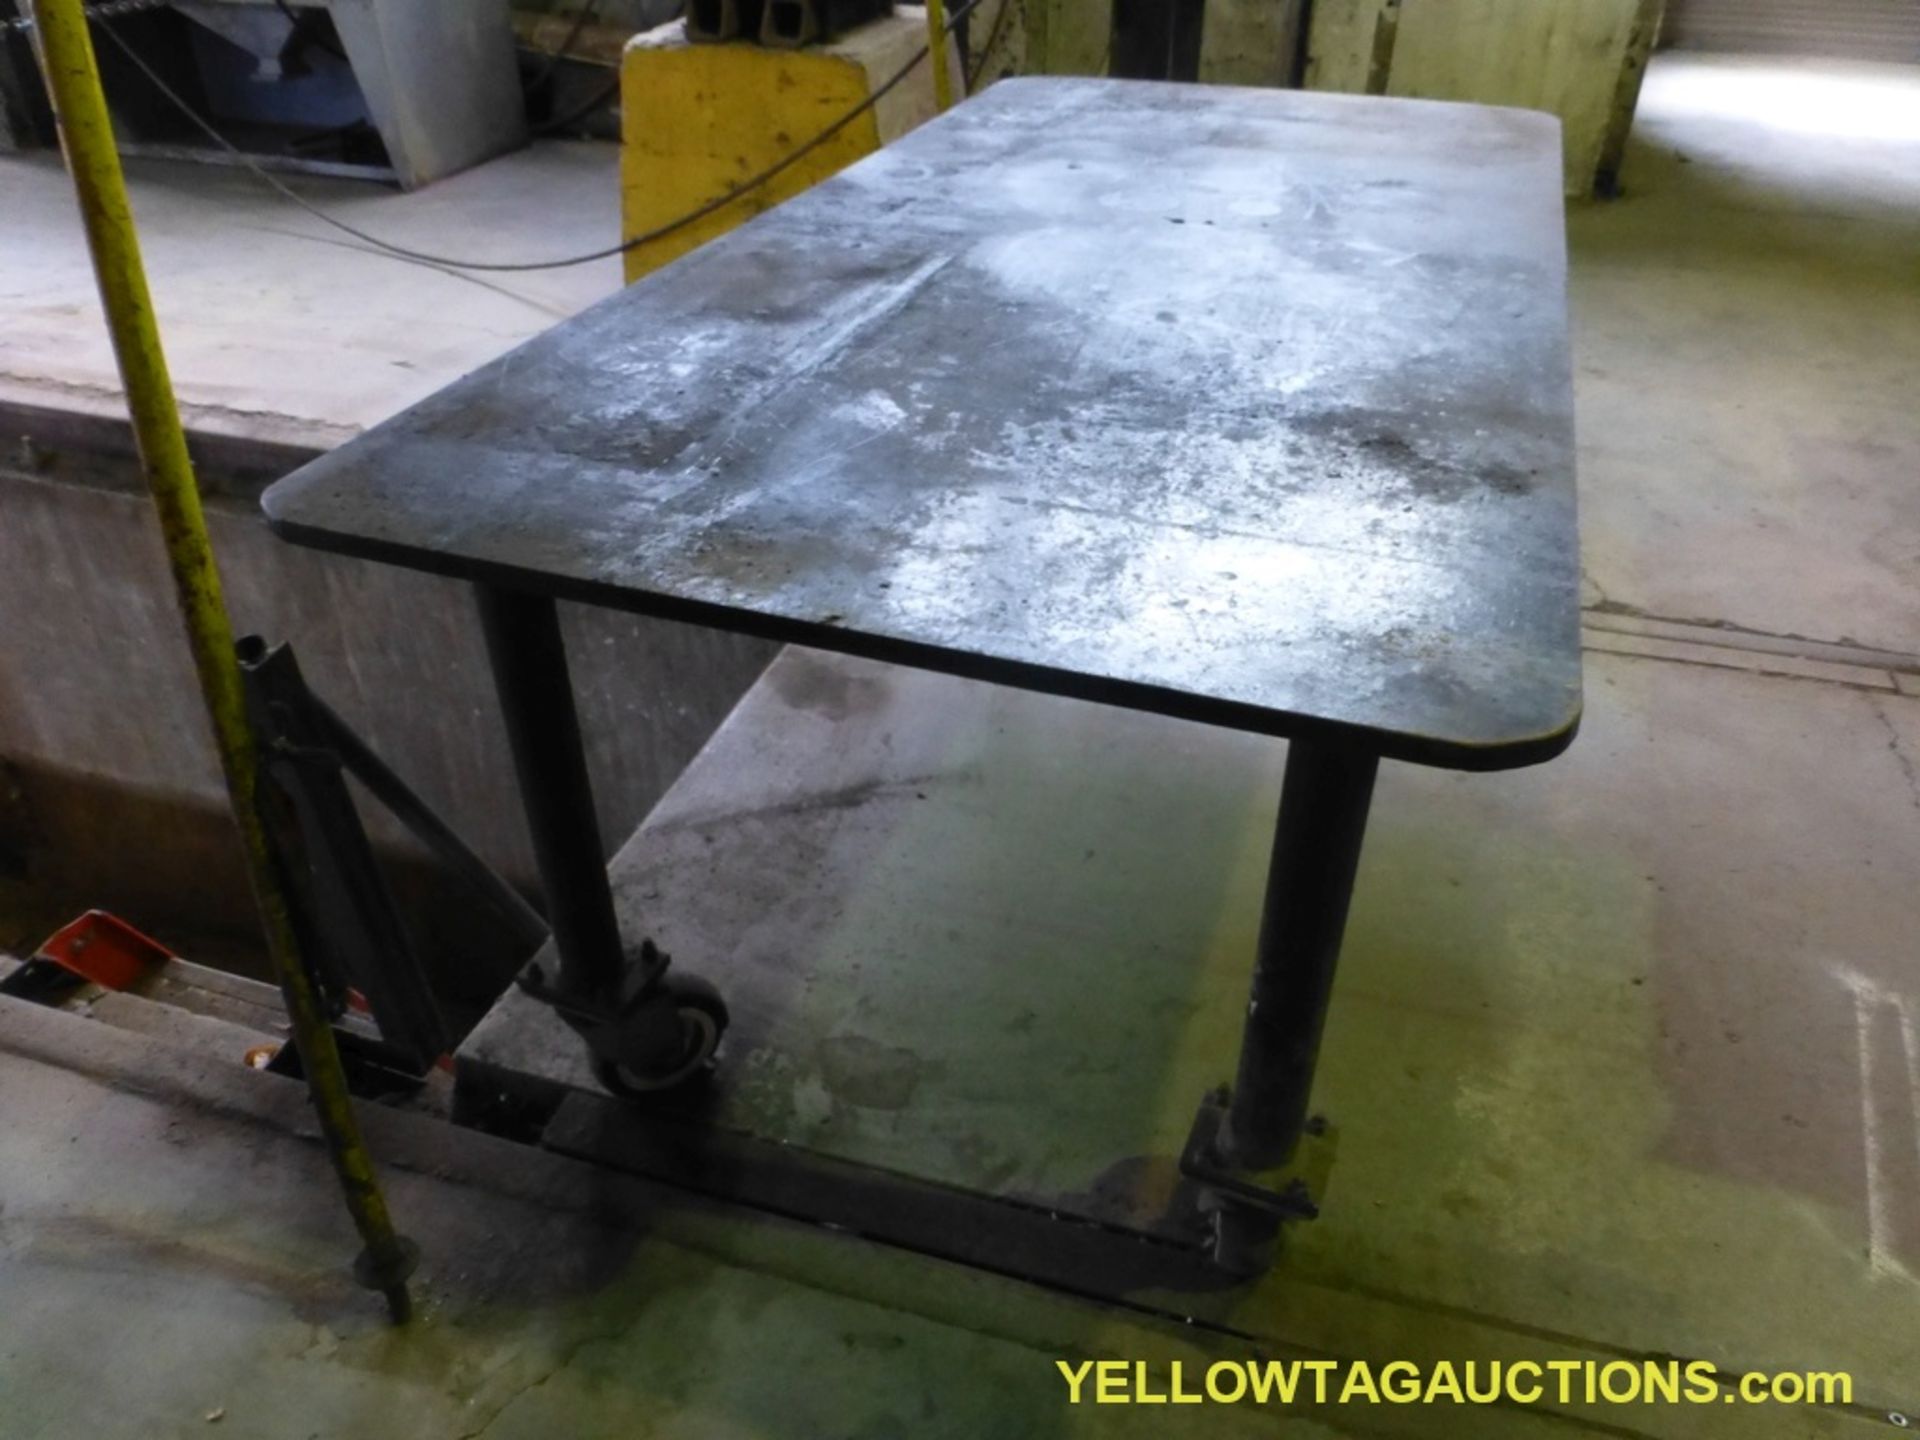 Metal Work Table on Wheels | 6'L x 3'W x 2-1/2H - Image 2 of 4